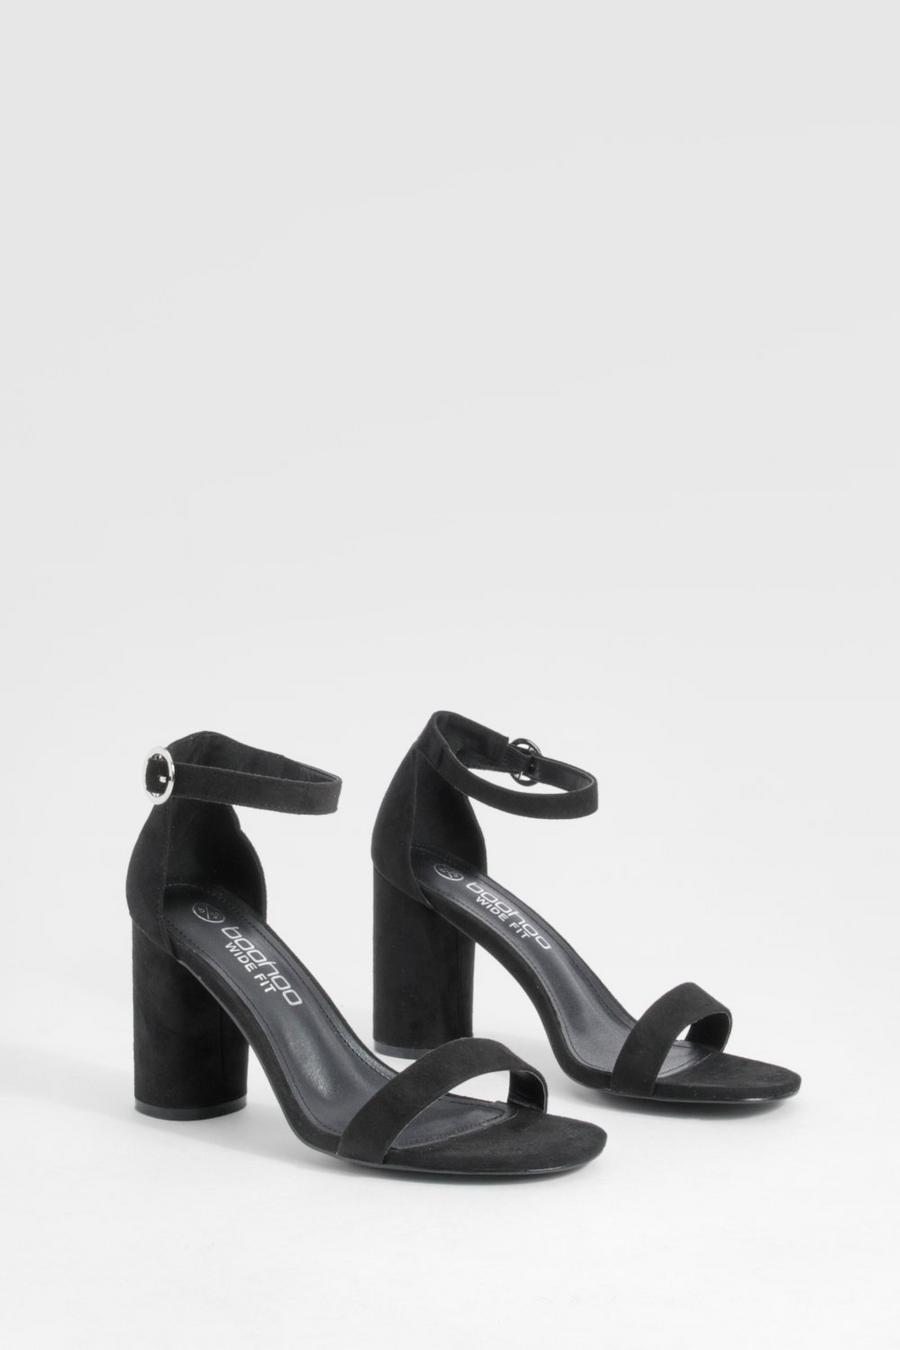 Black Wide Width Rounded Heel 2 Part Barely There Heels